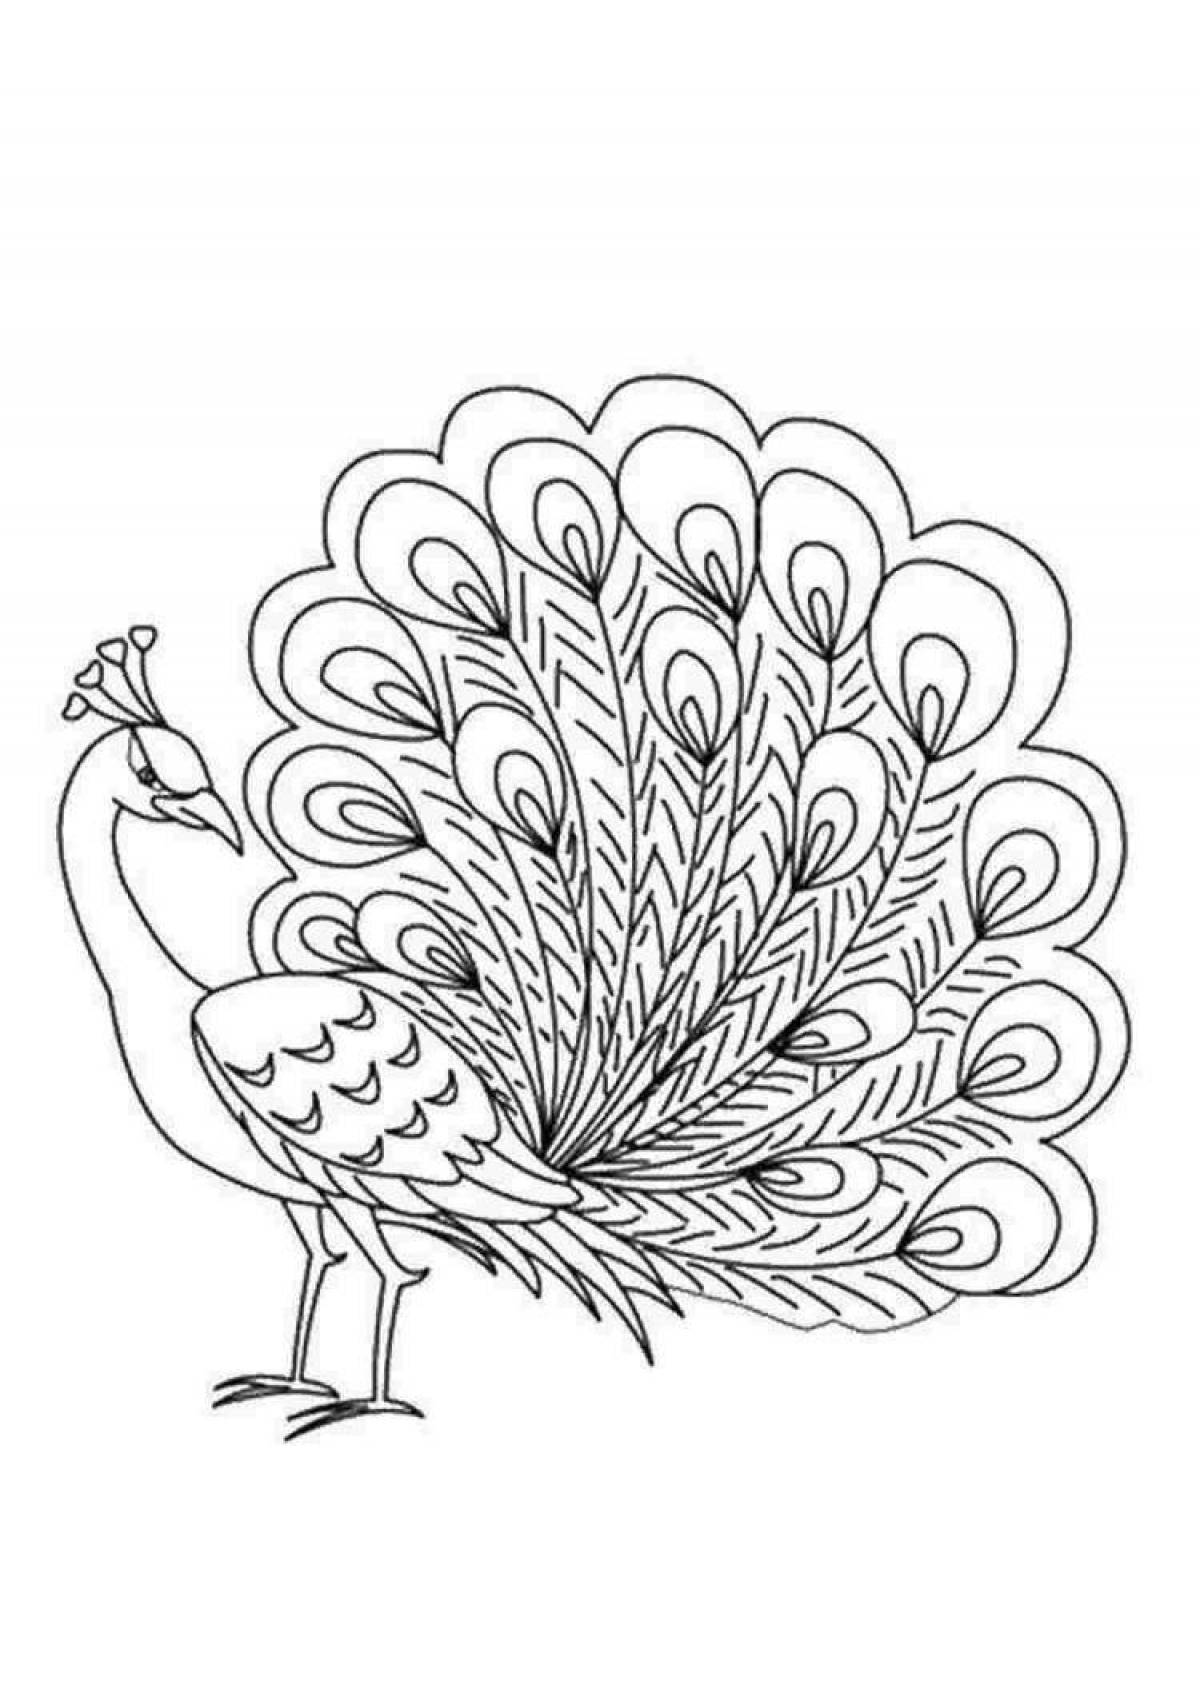 Joyful peacock feather coloring book for kids